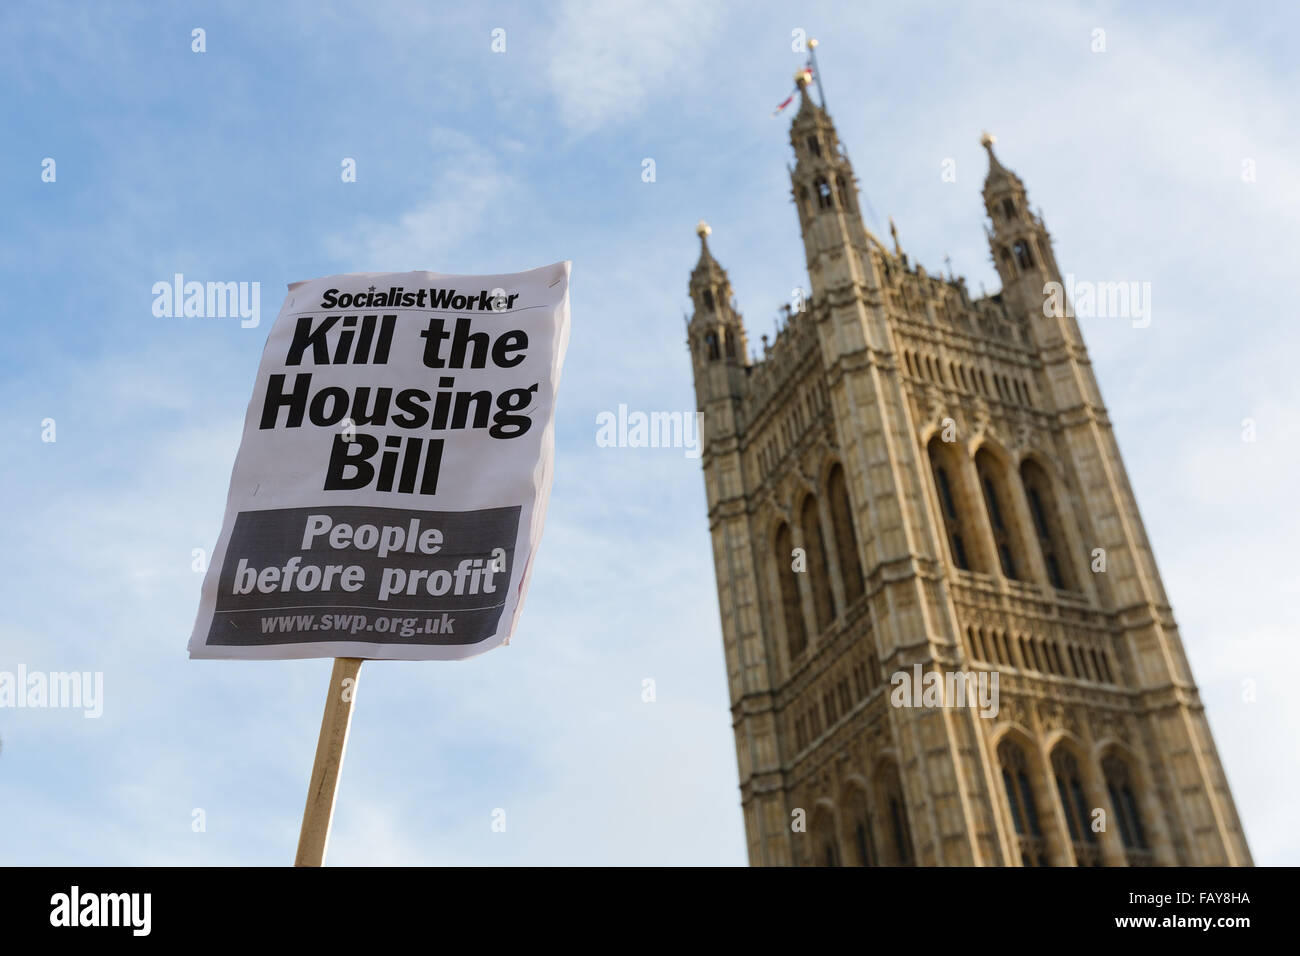 London, UK. 5th January, 2016. Demonstrators from Defend Council Housing (DCH), housing groups, trades unions and Class War protest against the Housing Bill outside the Houses of Parliament in Westminster, London. Members of Parliament (MP’s) are debating the Housing and Planning Bill, which makes provisions about social housing, right to buy, estate agents, rent charges, planning and compulsory purchase. Protesters claim that the Housing Bill, if passed will effectively end council housing. Stock Photo